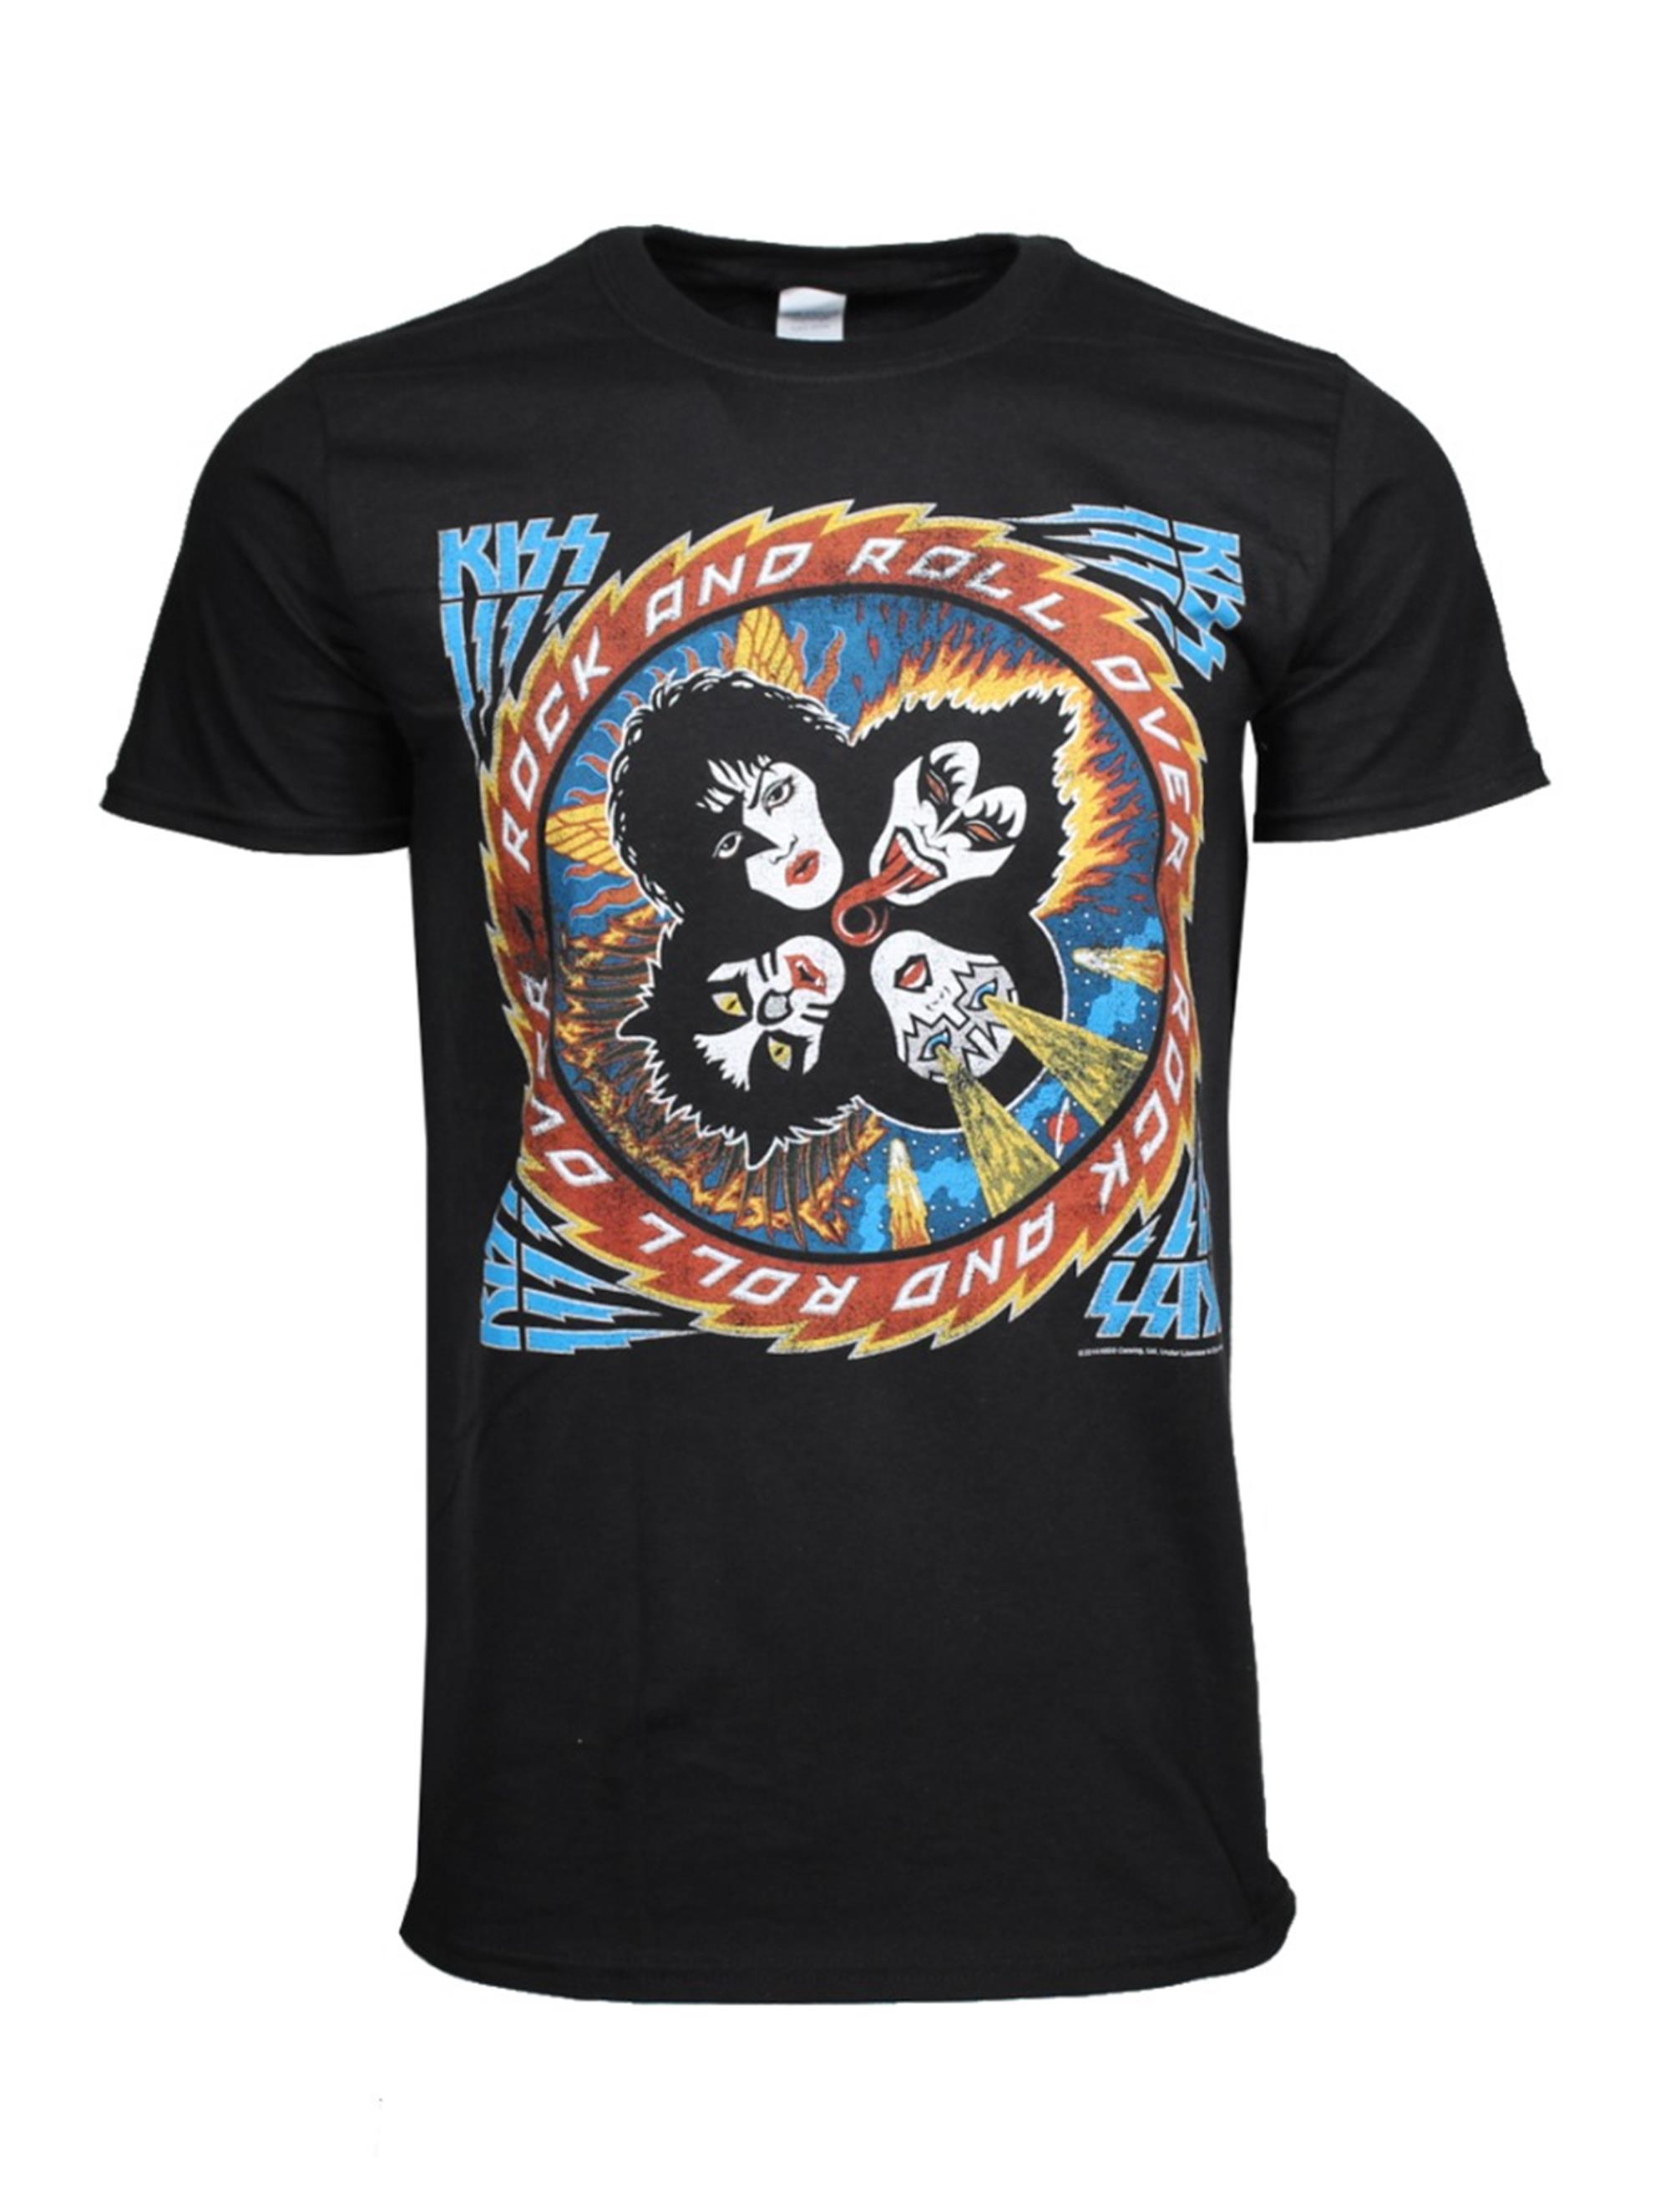 KISS Rock and Roll All Over T-Shirt